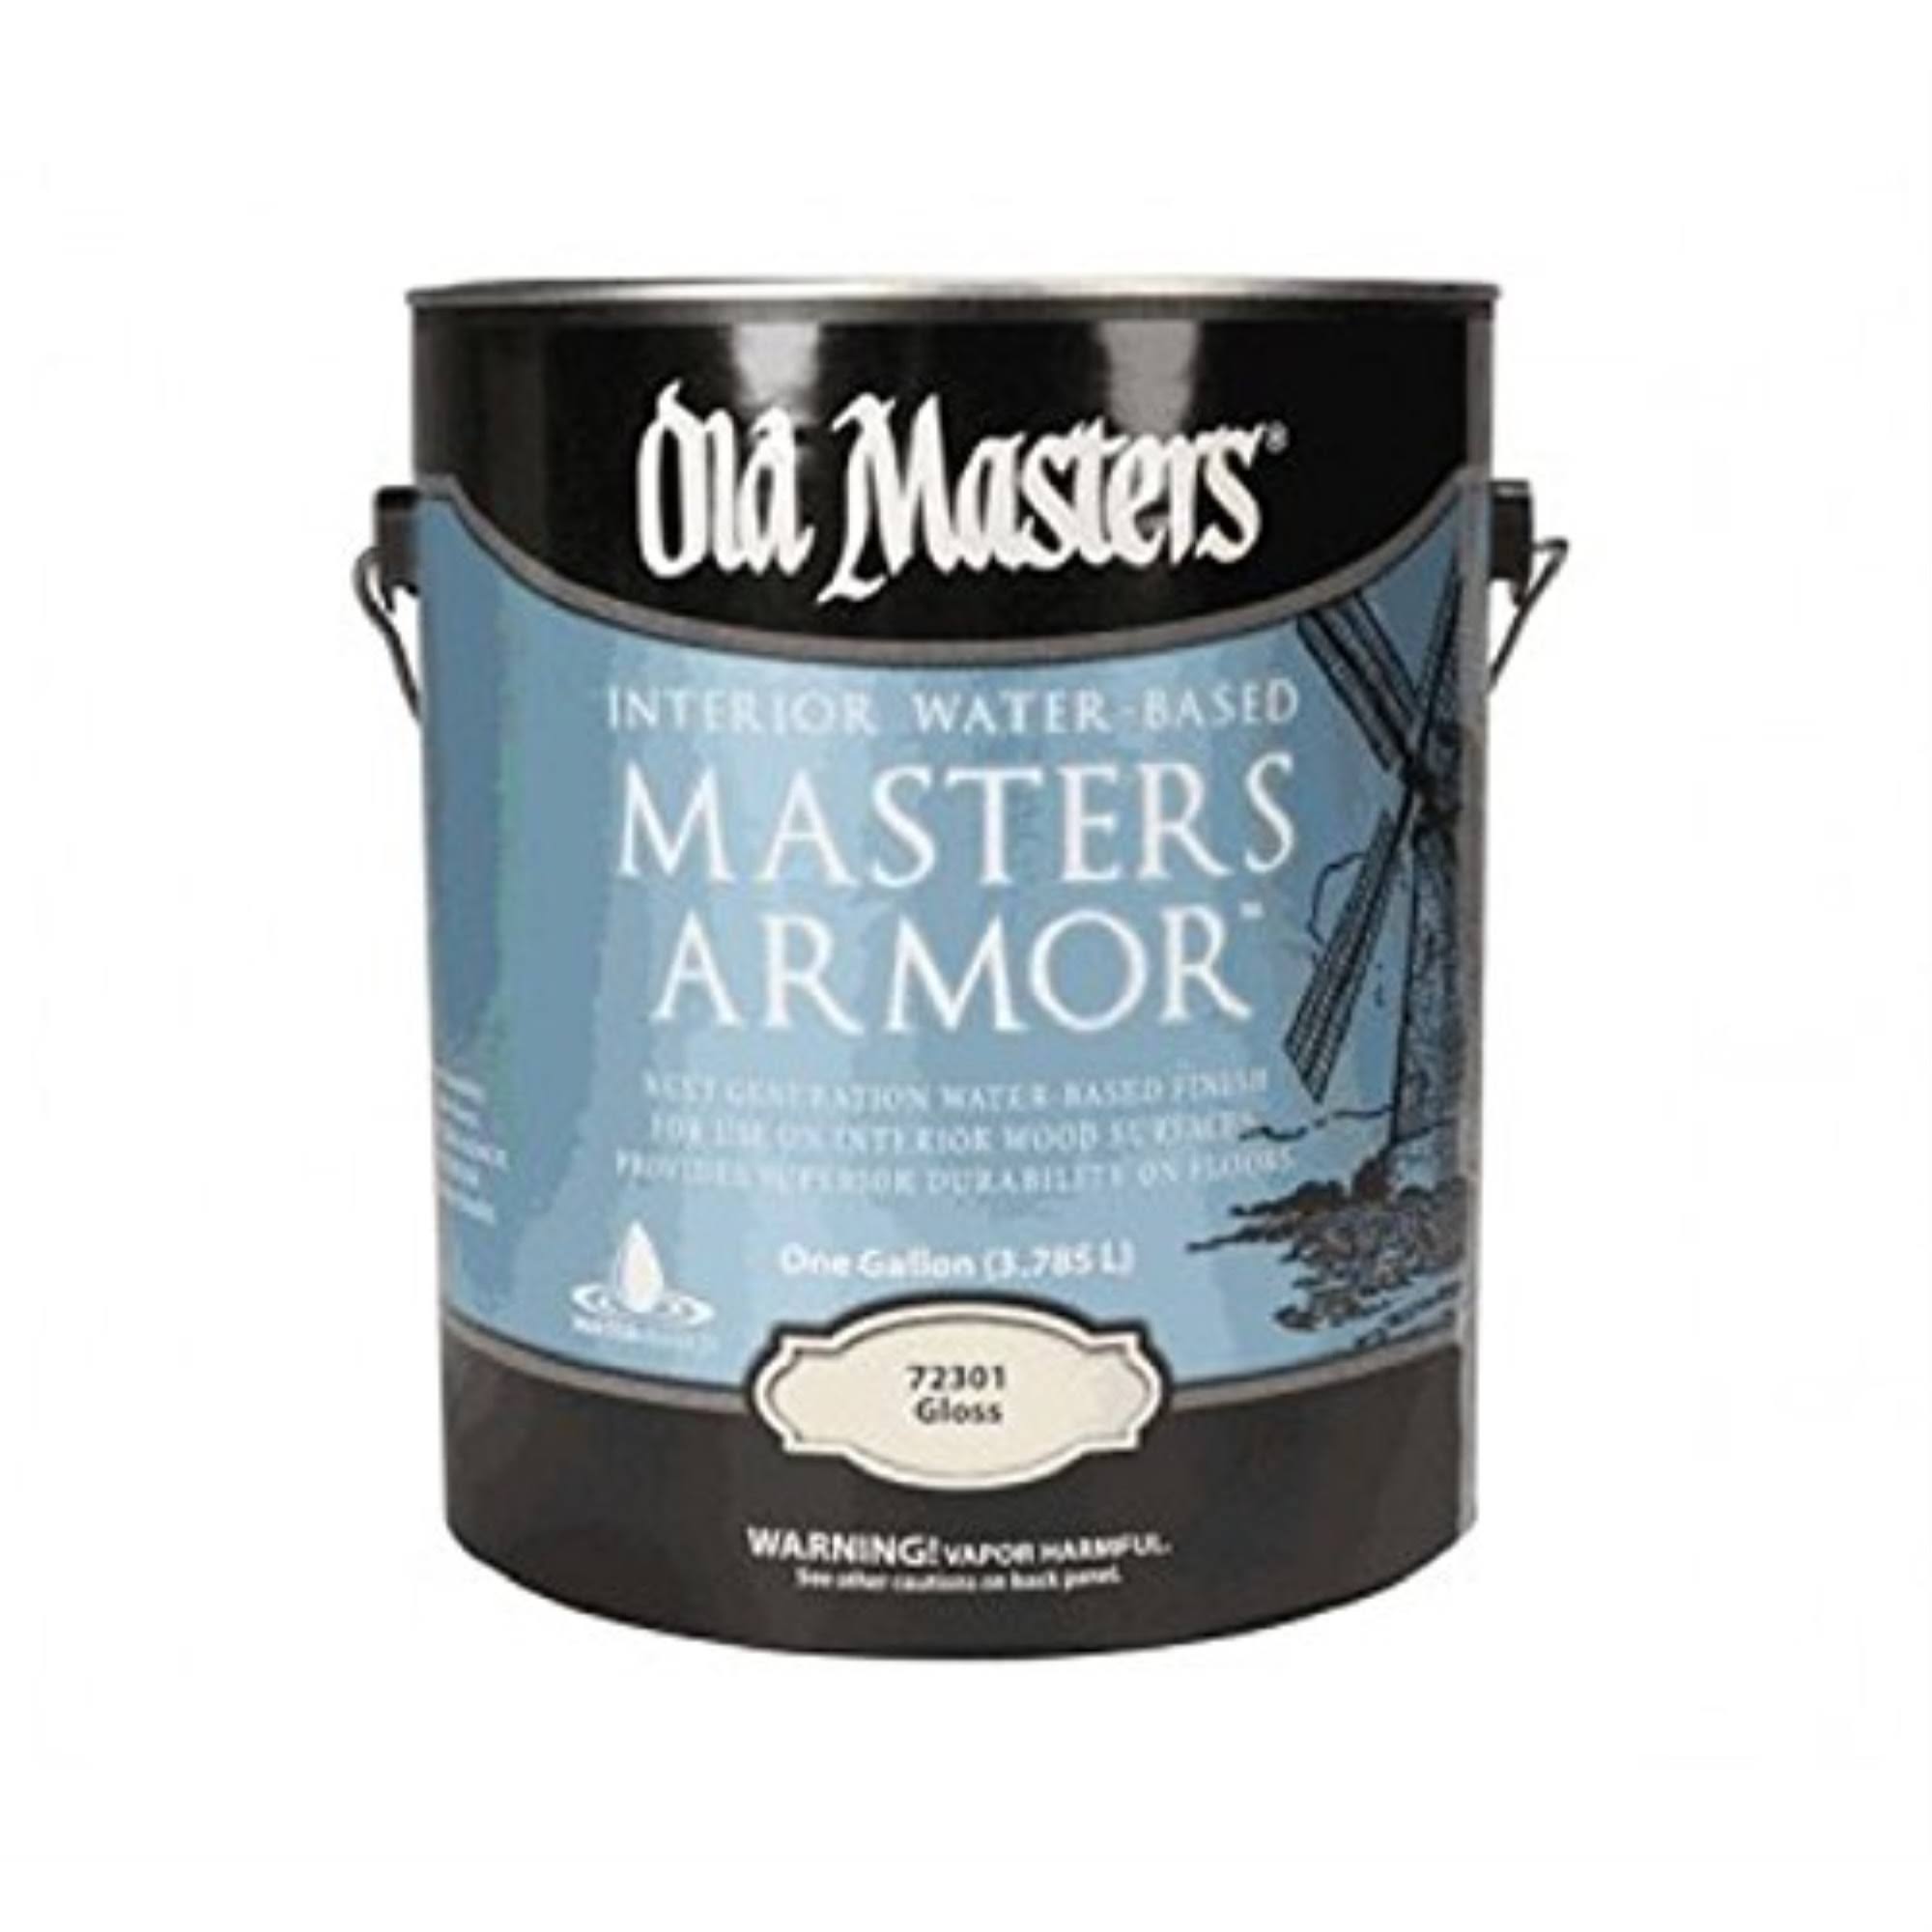 Old Masters 72301 Wood Stain, Gloss, 1 Gal 2 Pack